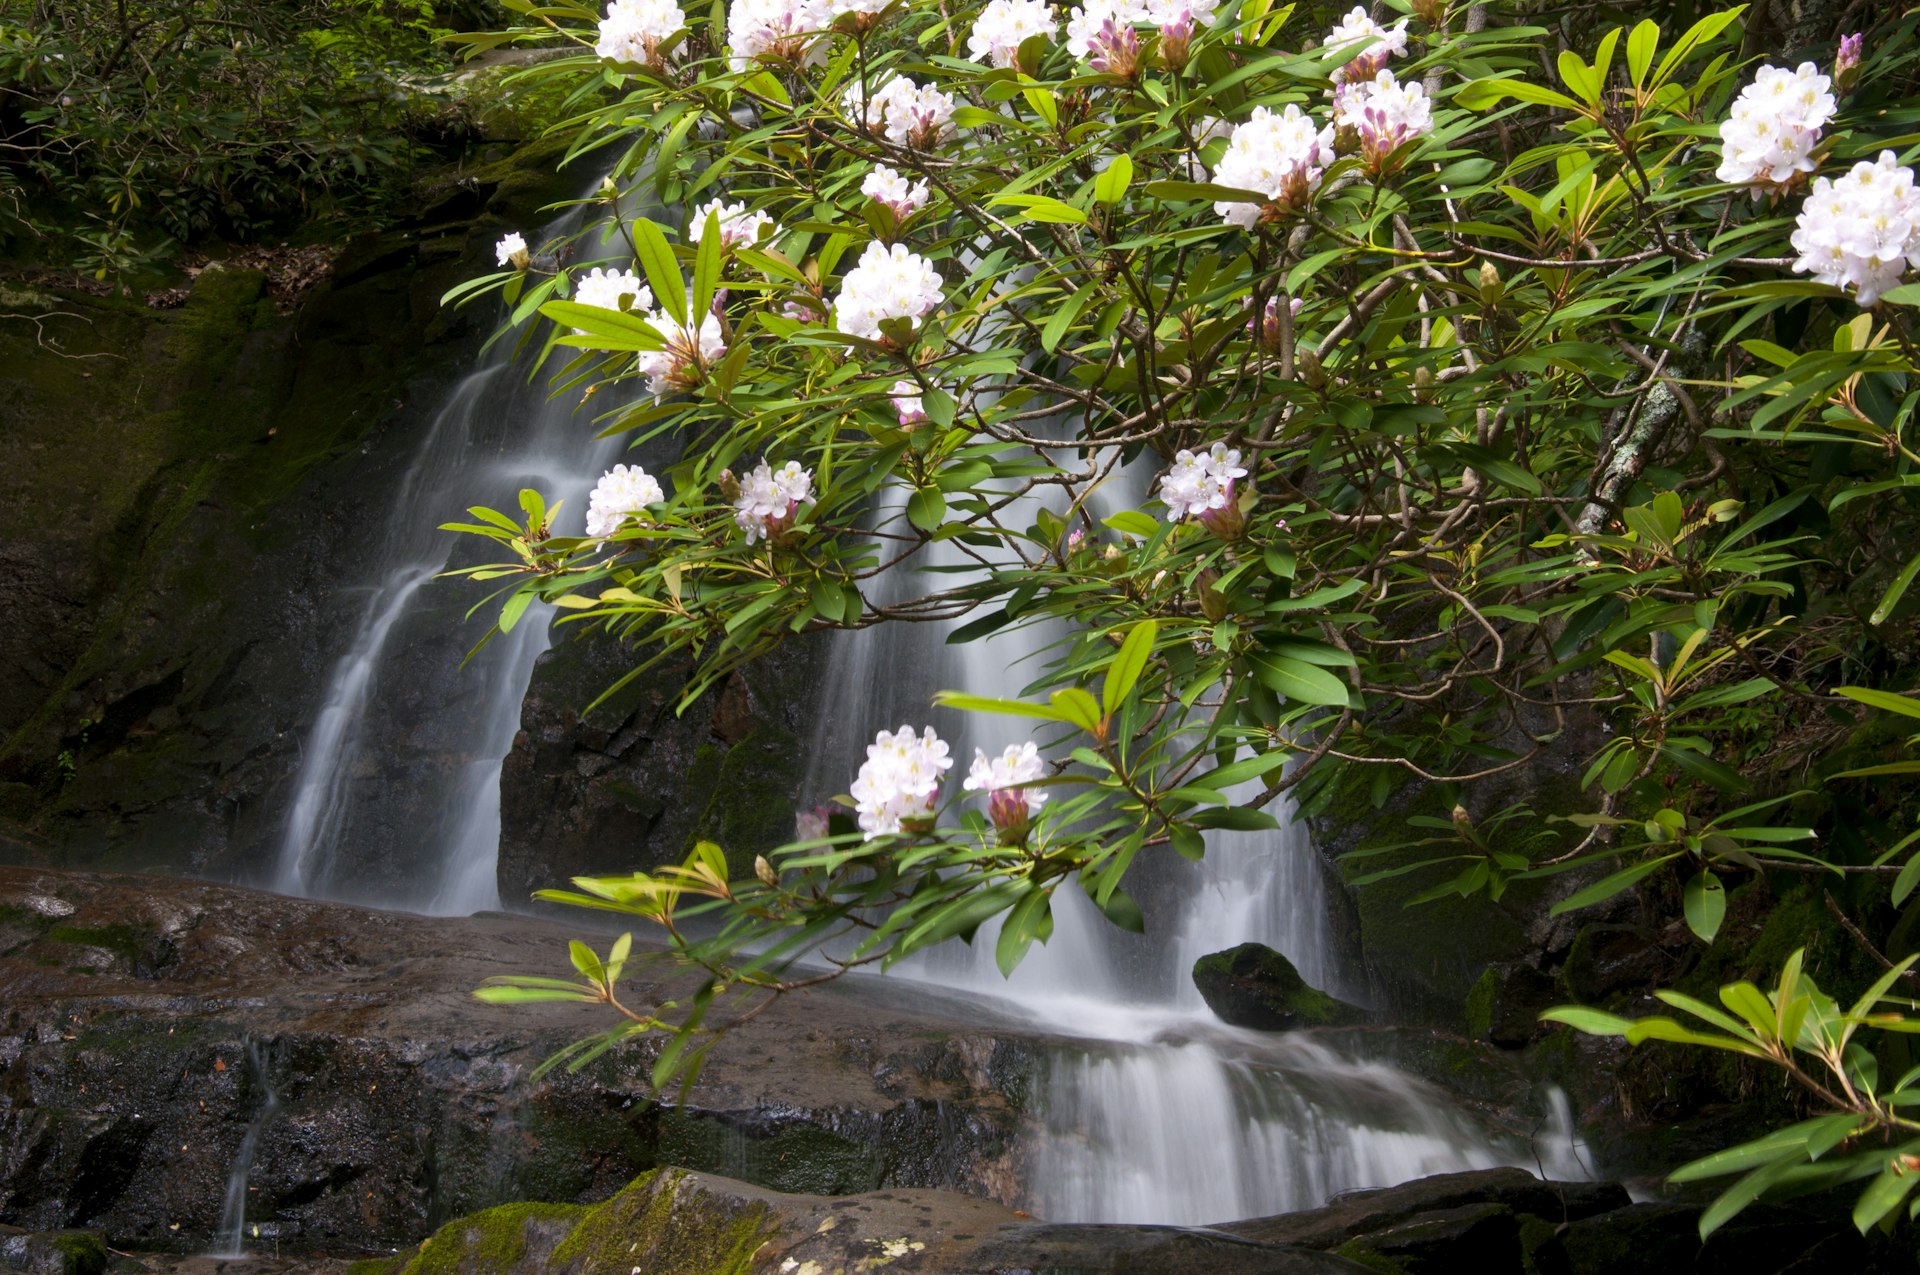 Blooming rhododendron surround Laurel Falls.